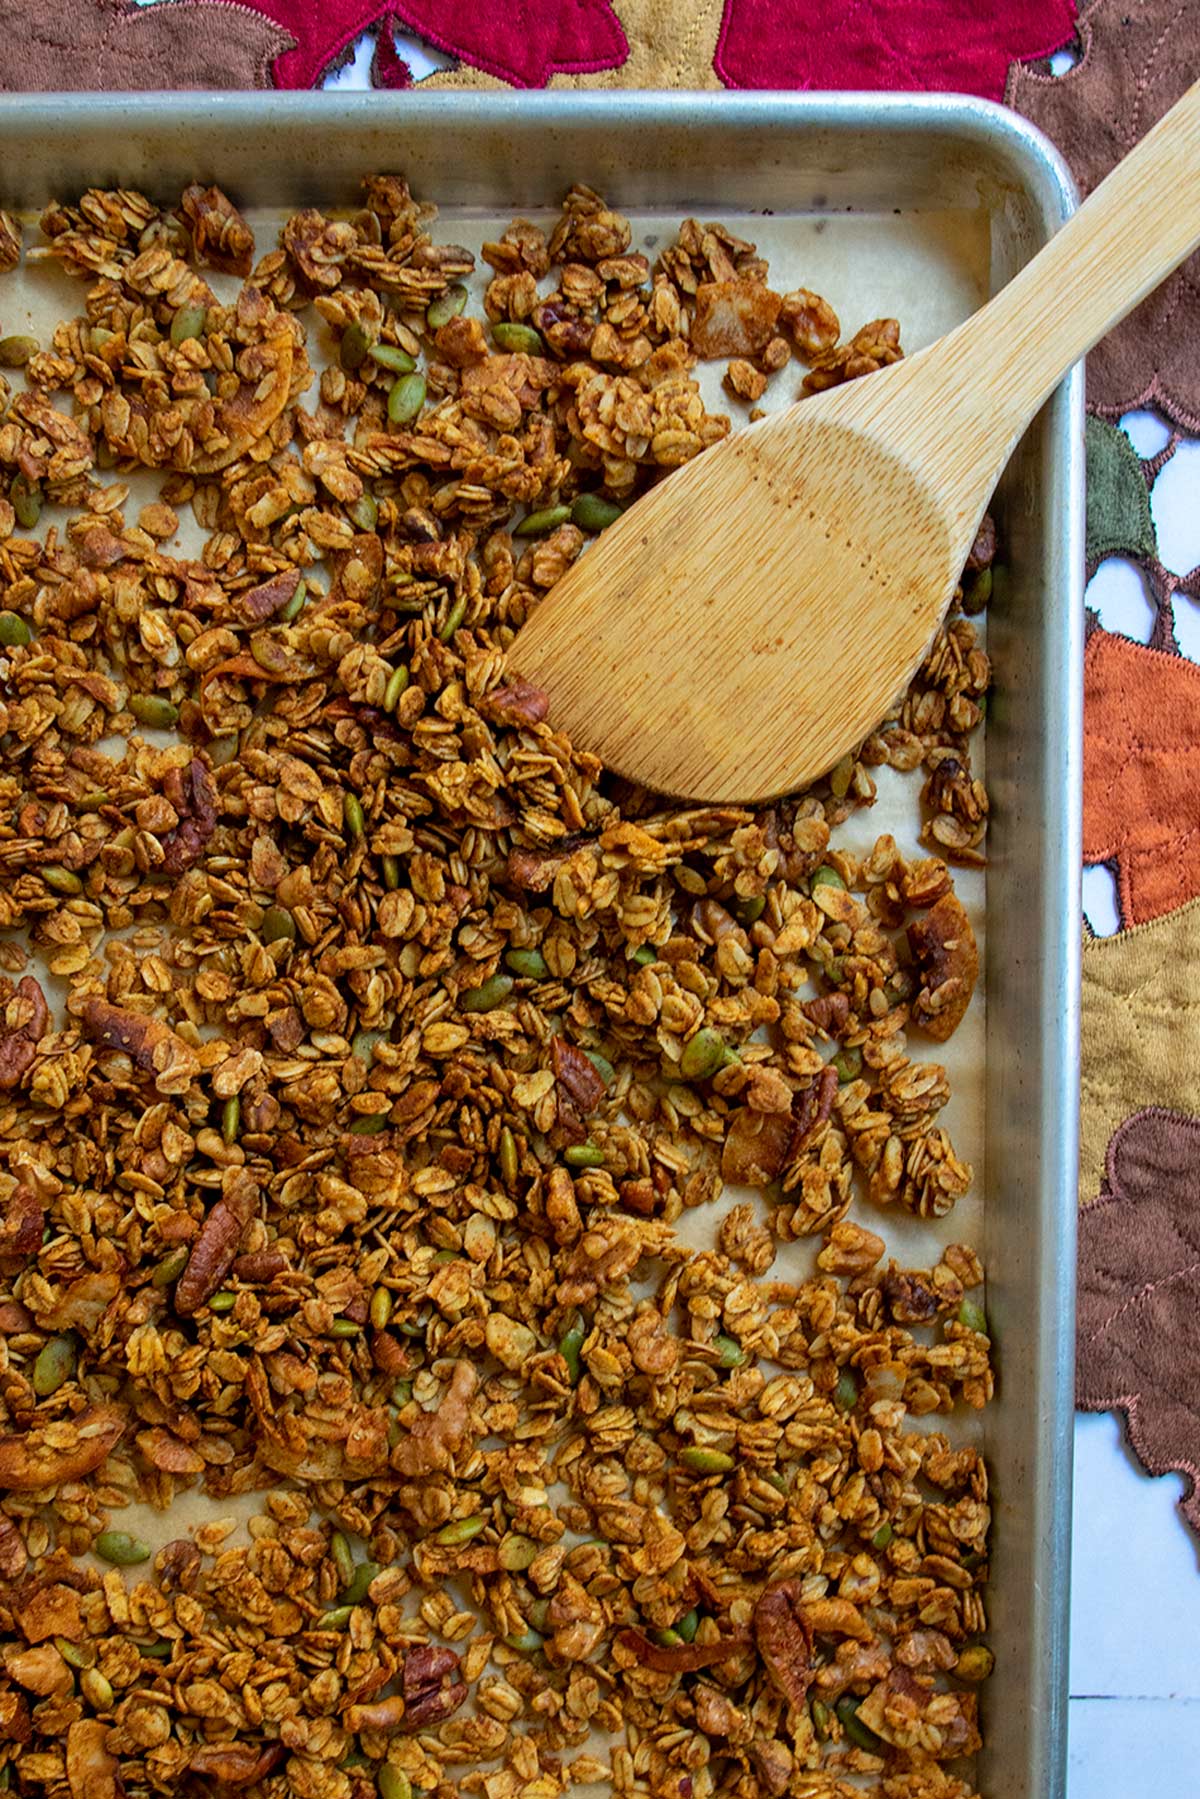 Baked granola on sheet tray with wooden mixing paddle.